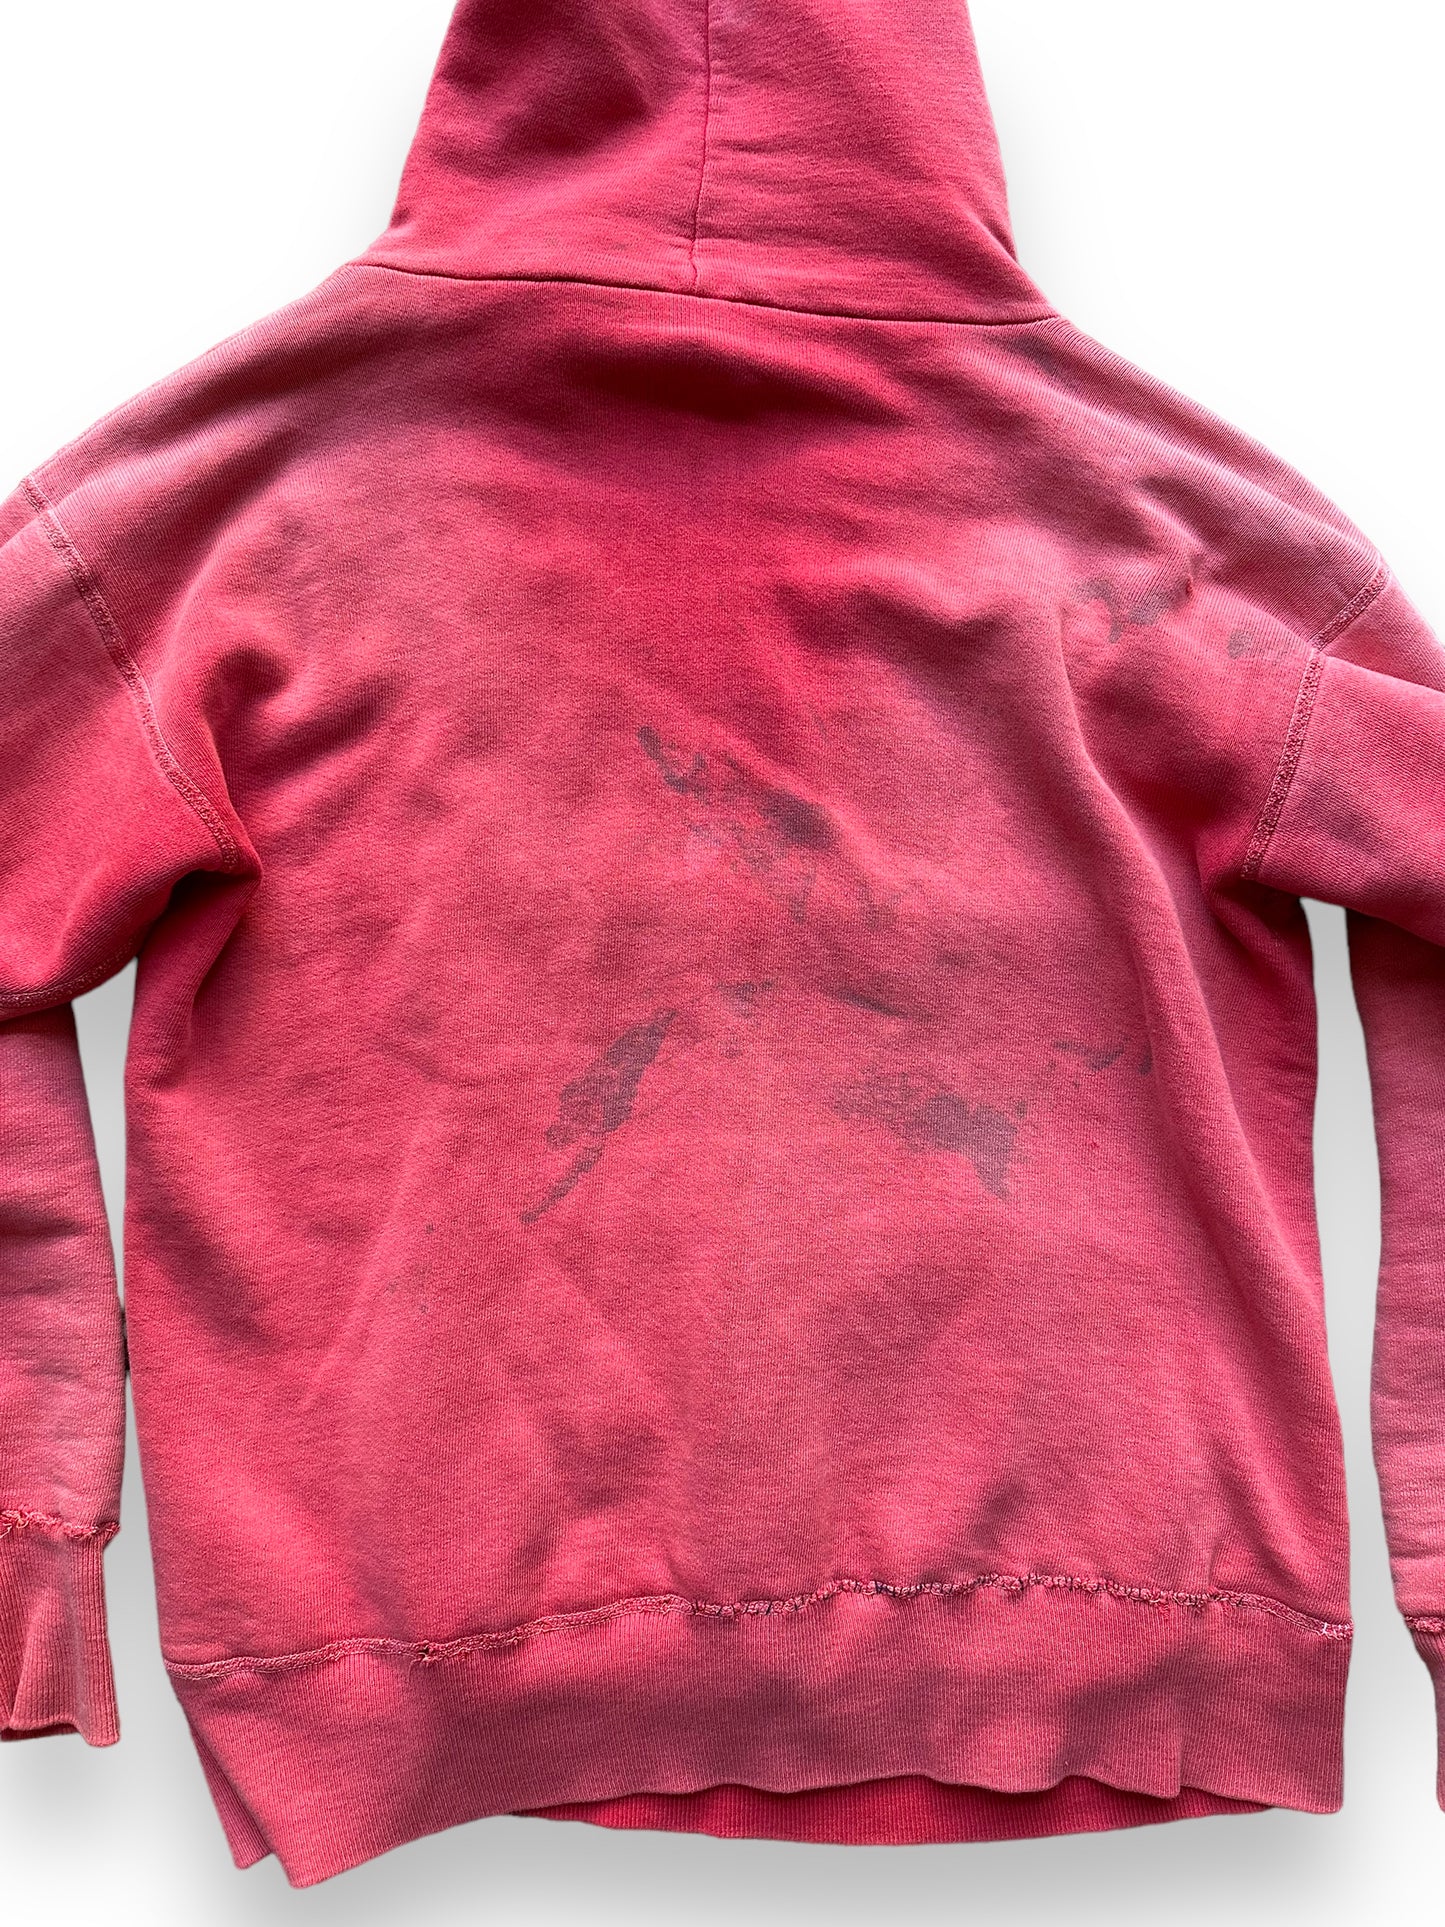 Rear Detail on Vintage Red De Jac Waffle Lined Hooded Sweatshirt SZ L | Vintage Waffle Sweatshirt Seattle | Barn Owl Vintage Clothing